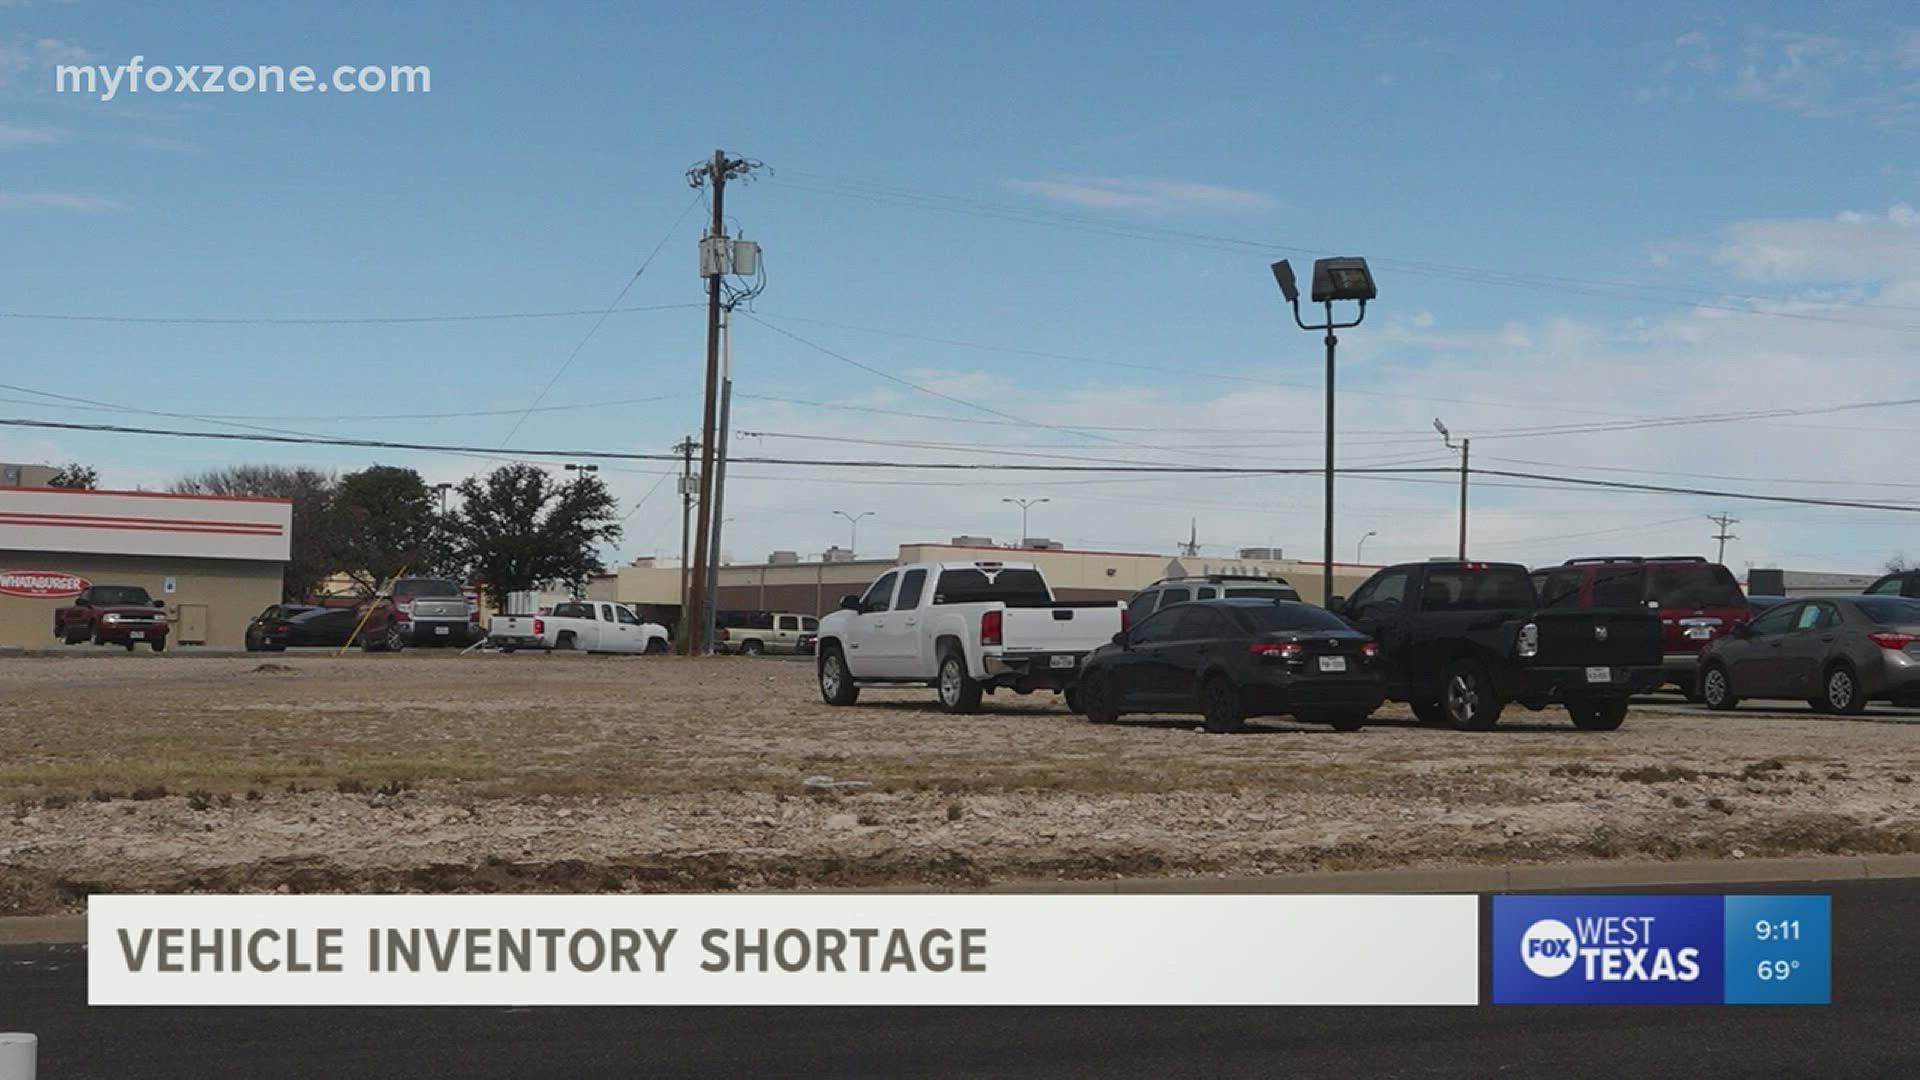 West Texas dealerships are being affected by vehicle inventory shortages and some customers believe it could get worse.